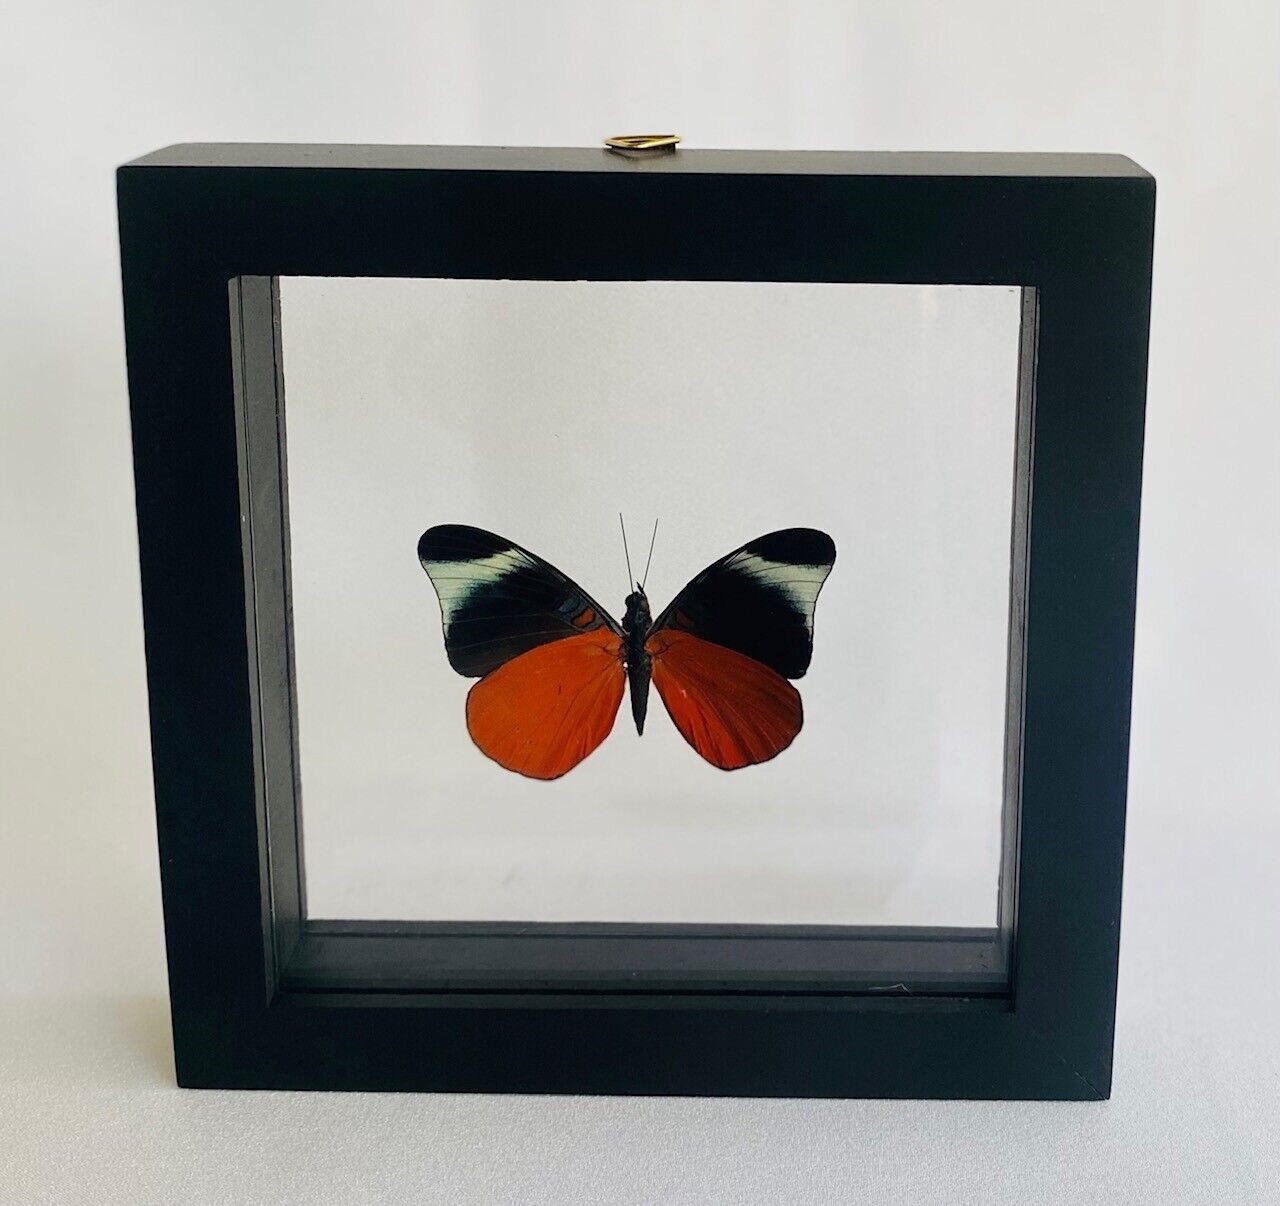 Framed butterfly - Worldwide Insects - The Red Flasher (Panacea Prola) - 5x5 